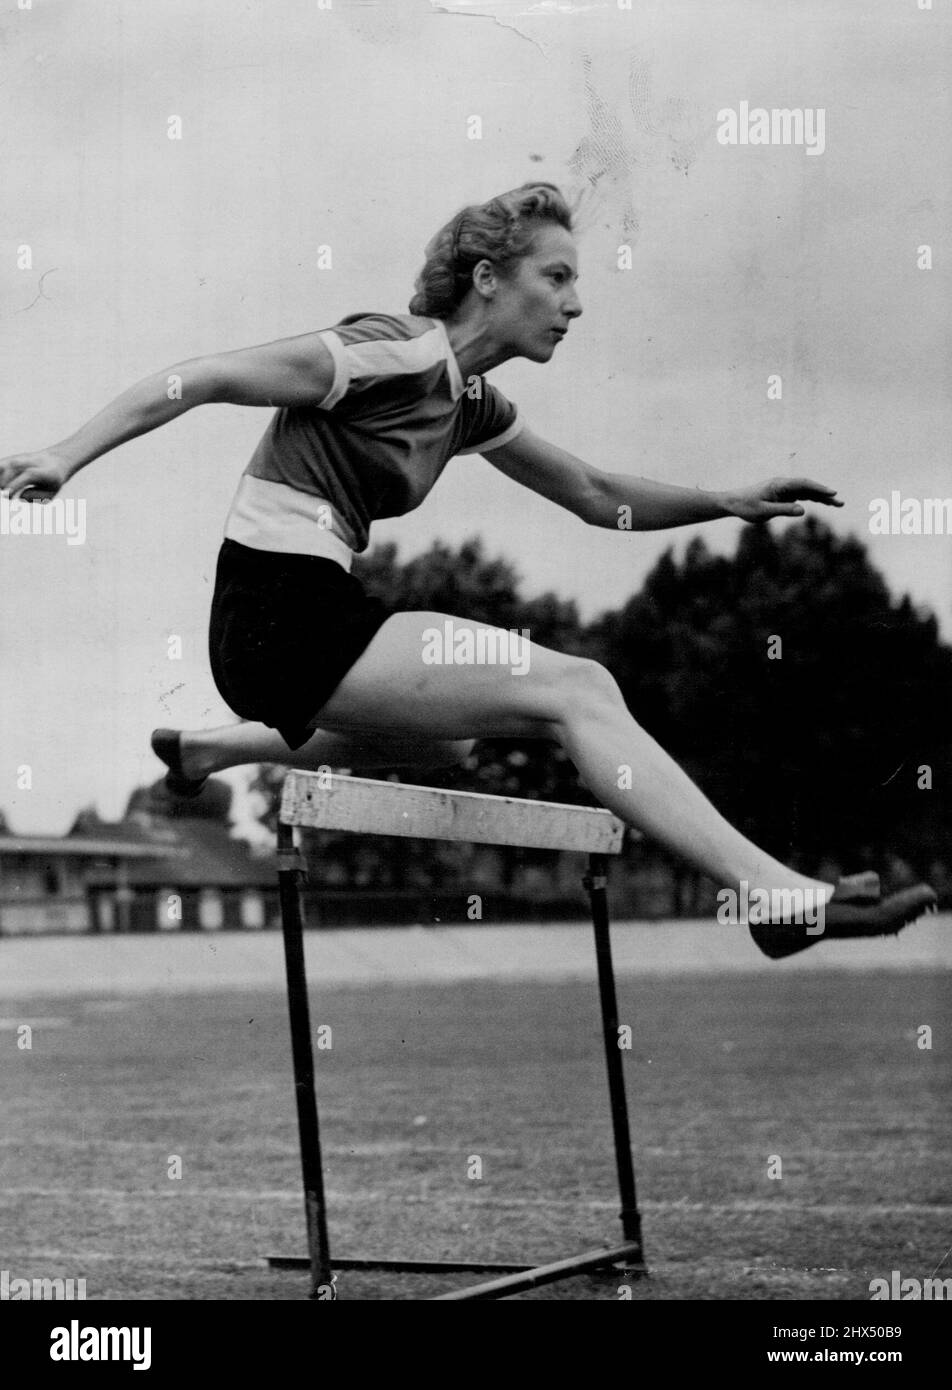 Australian Girl Hurdles To Helsinki Via London -- Miss Shirley Strickland (Western Australia), one of Australia's women athletes for the Olympic Games, practising over the hurdles at Paddington Track, London, today (Thursday). The Australian athletes are in London on their way to Helsinki. Miss Strickland is a 100 and 200-metres sprinter as well as a hurdler. June 19, 1952. (Photo by Reuterphoto). Stock Photo